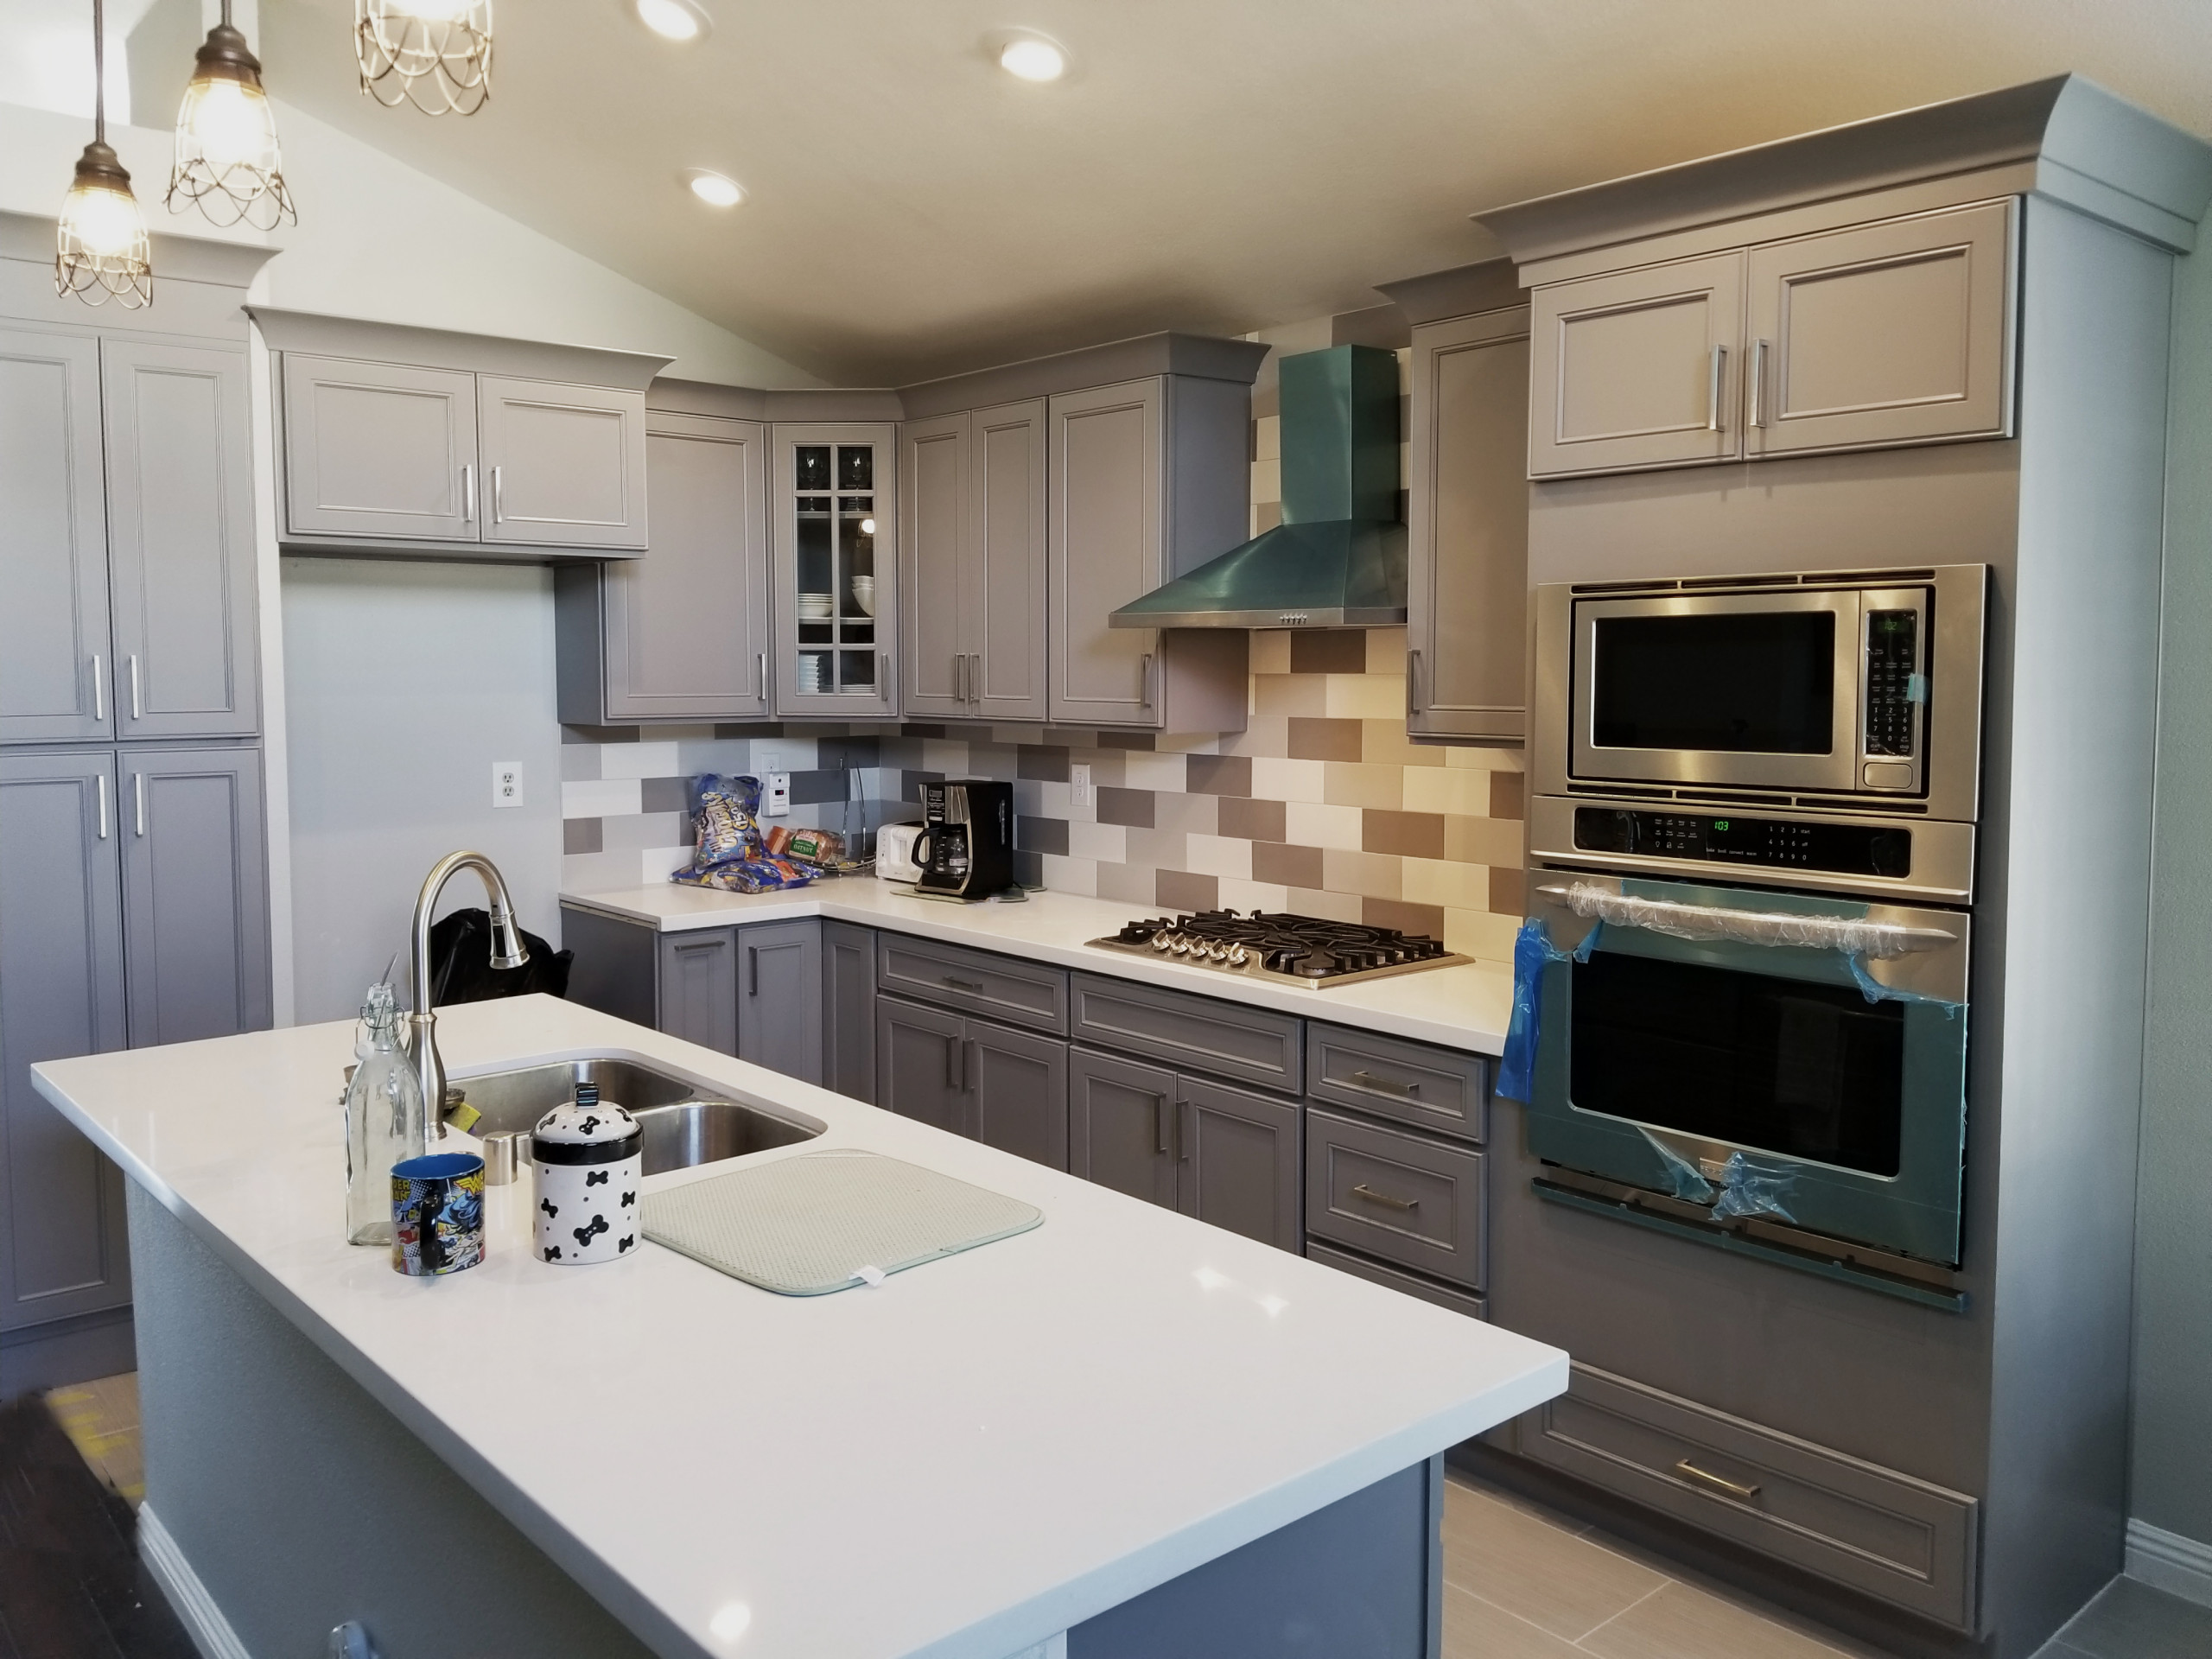 Beautifully Crafted Kitchens